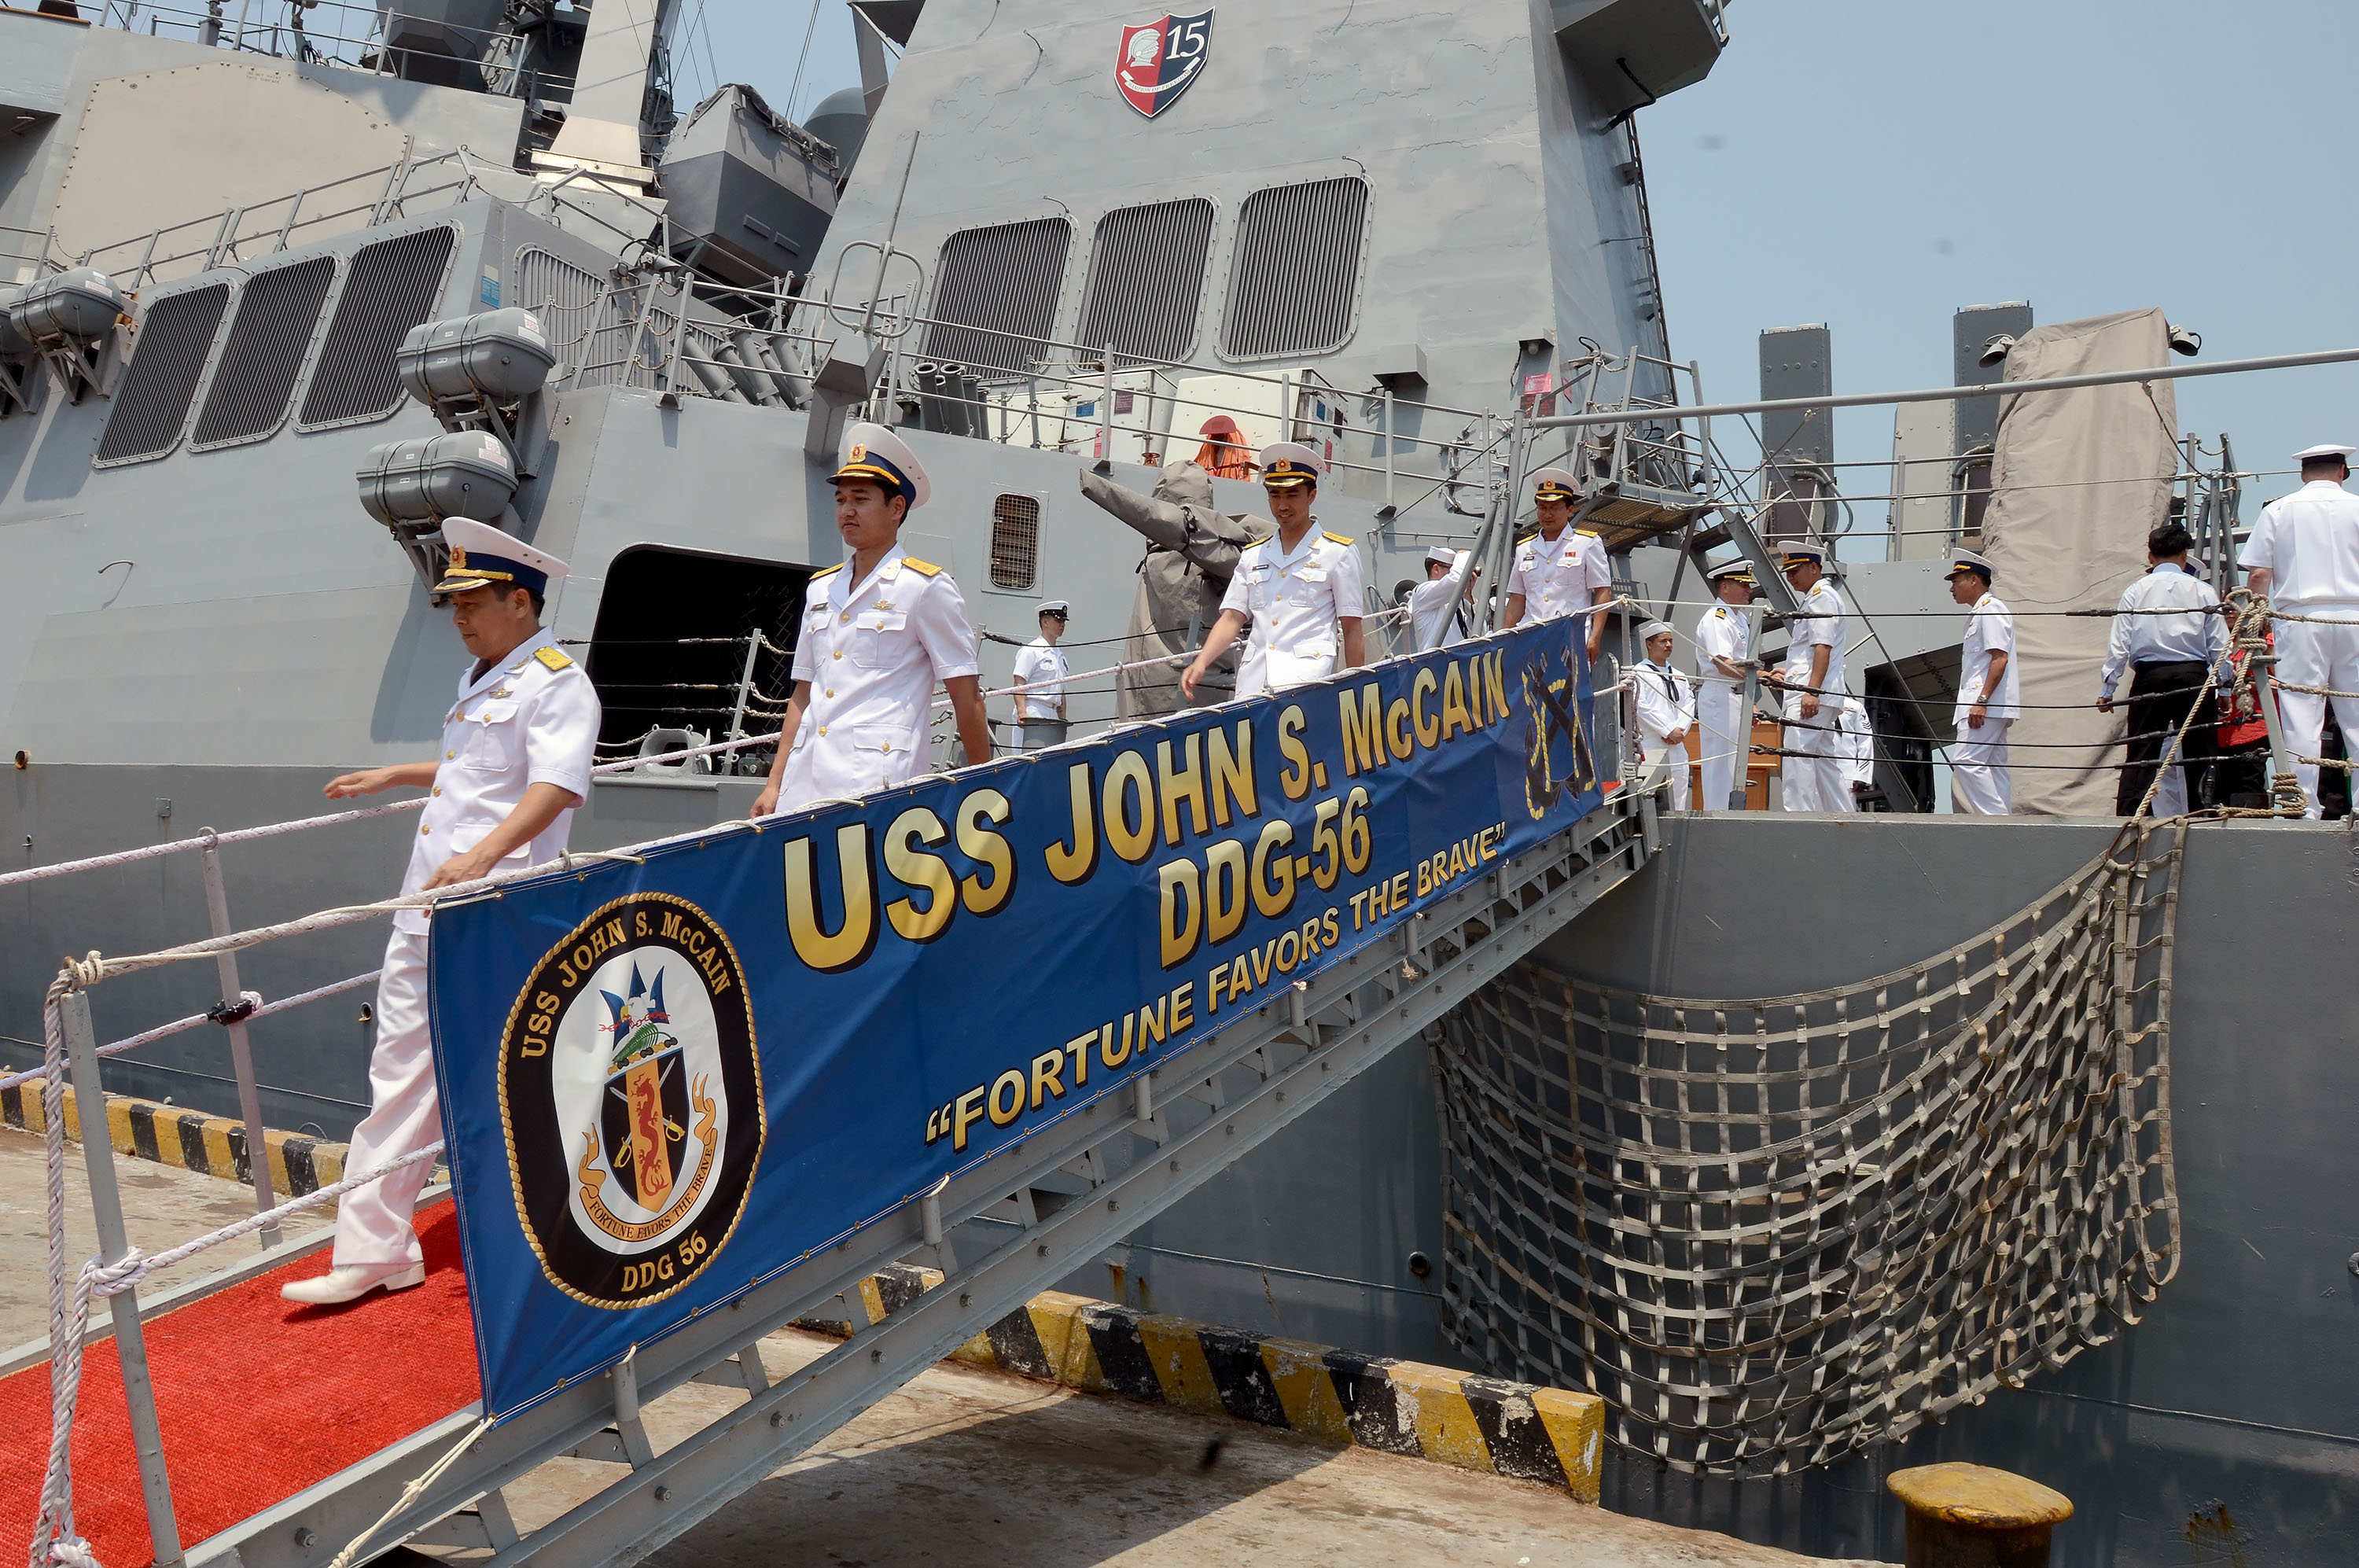 140407-N-YU572-329 DA NANG, Vietnam (April 7, 2014) Members of the Vietnam People’s Navy depart the Arleigh Burke-class guided-missile destroyer USS John S. McCain (DDG 56) following a shipboard tour in support of Naval Engagement Activity (NEA) Vietnam. The NEA provides opportunities for U.S and Vietnamese naval professionals to share best practices and maritime skills in non-combatant areas, such as military medicine, search and rescue, diving and salvage and shipboard damage control. Approximately 400 U.S. Navy Sailors and civilian mariners are participating in NEA Vietnam 2014. (U.S Navy photo by Mass Communication Specialist 1st Class Jay C. Pugh/Released)